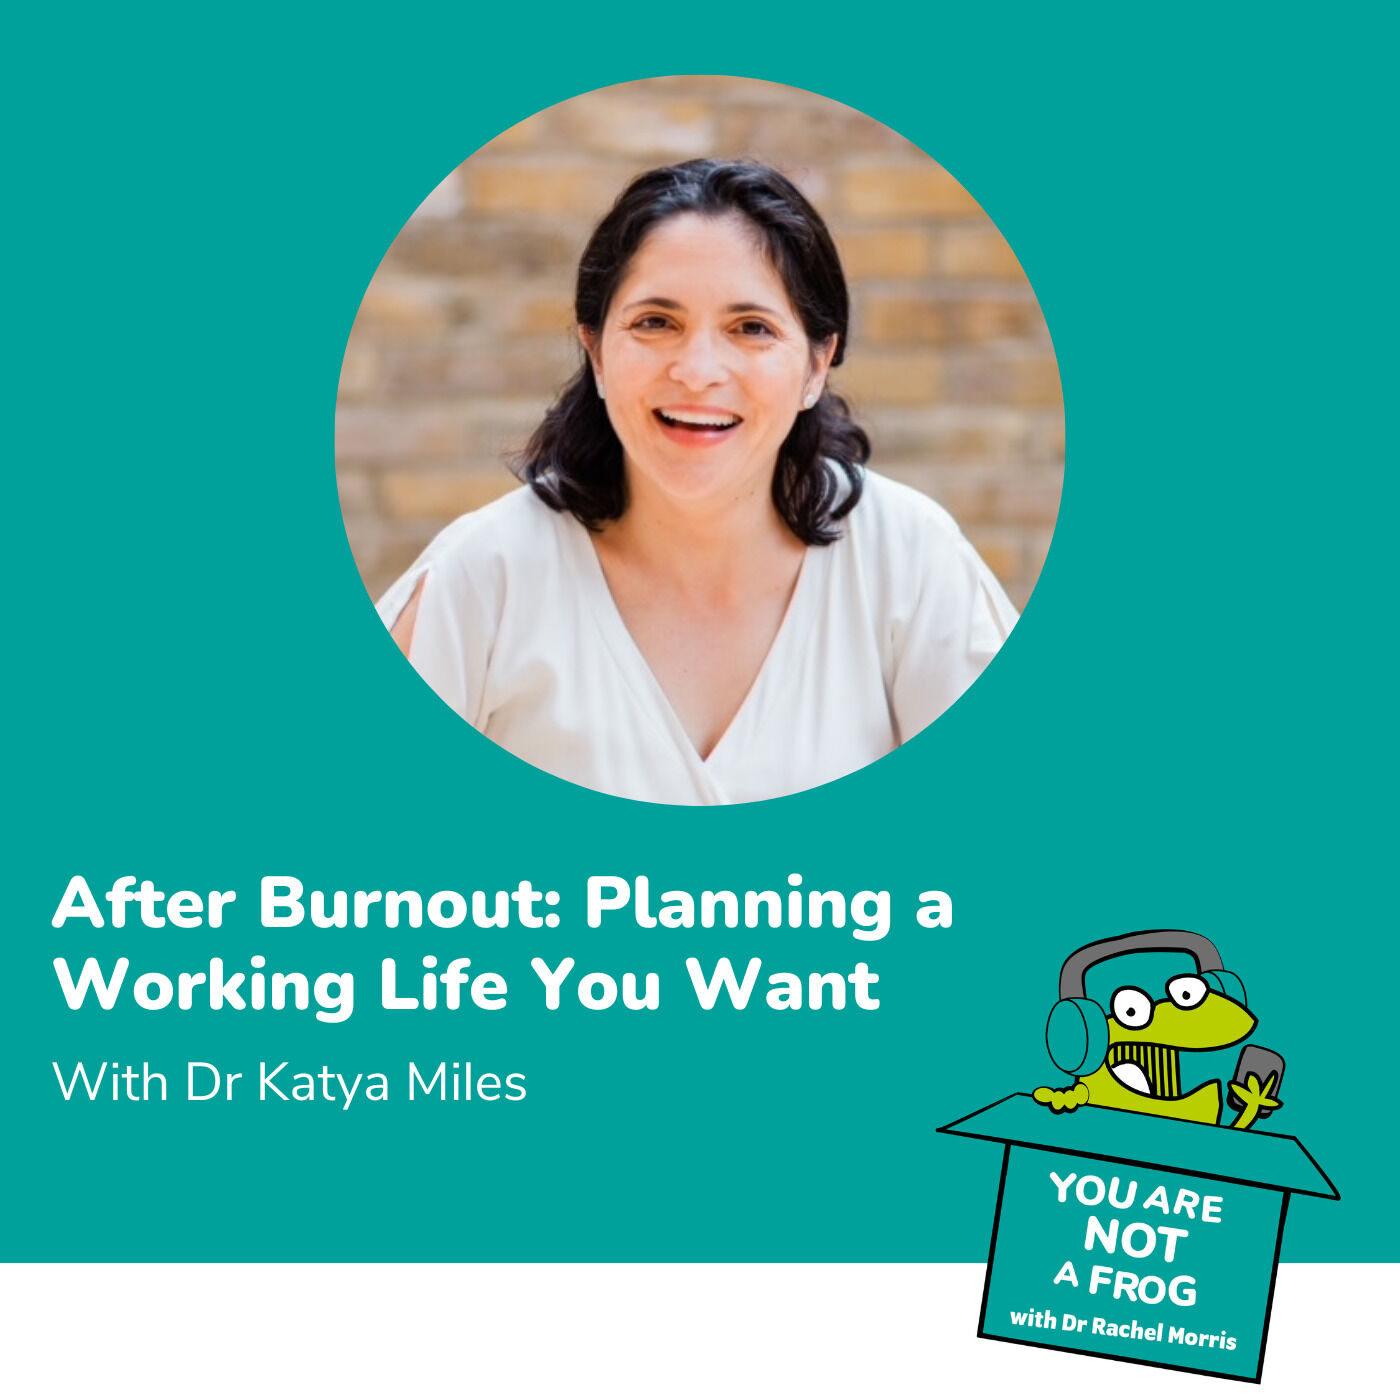 After Burnout: Planning a Working Life You Want